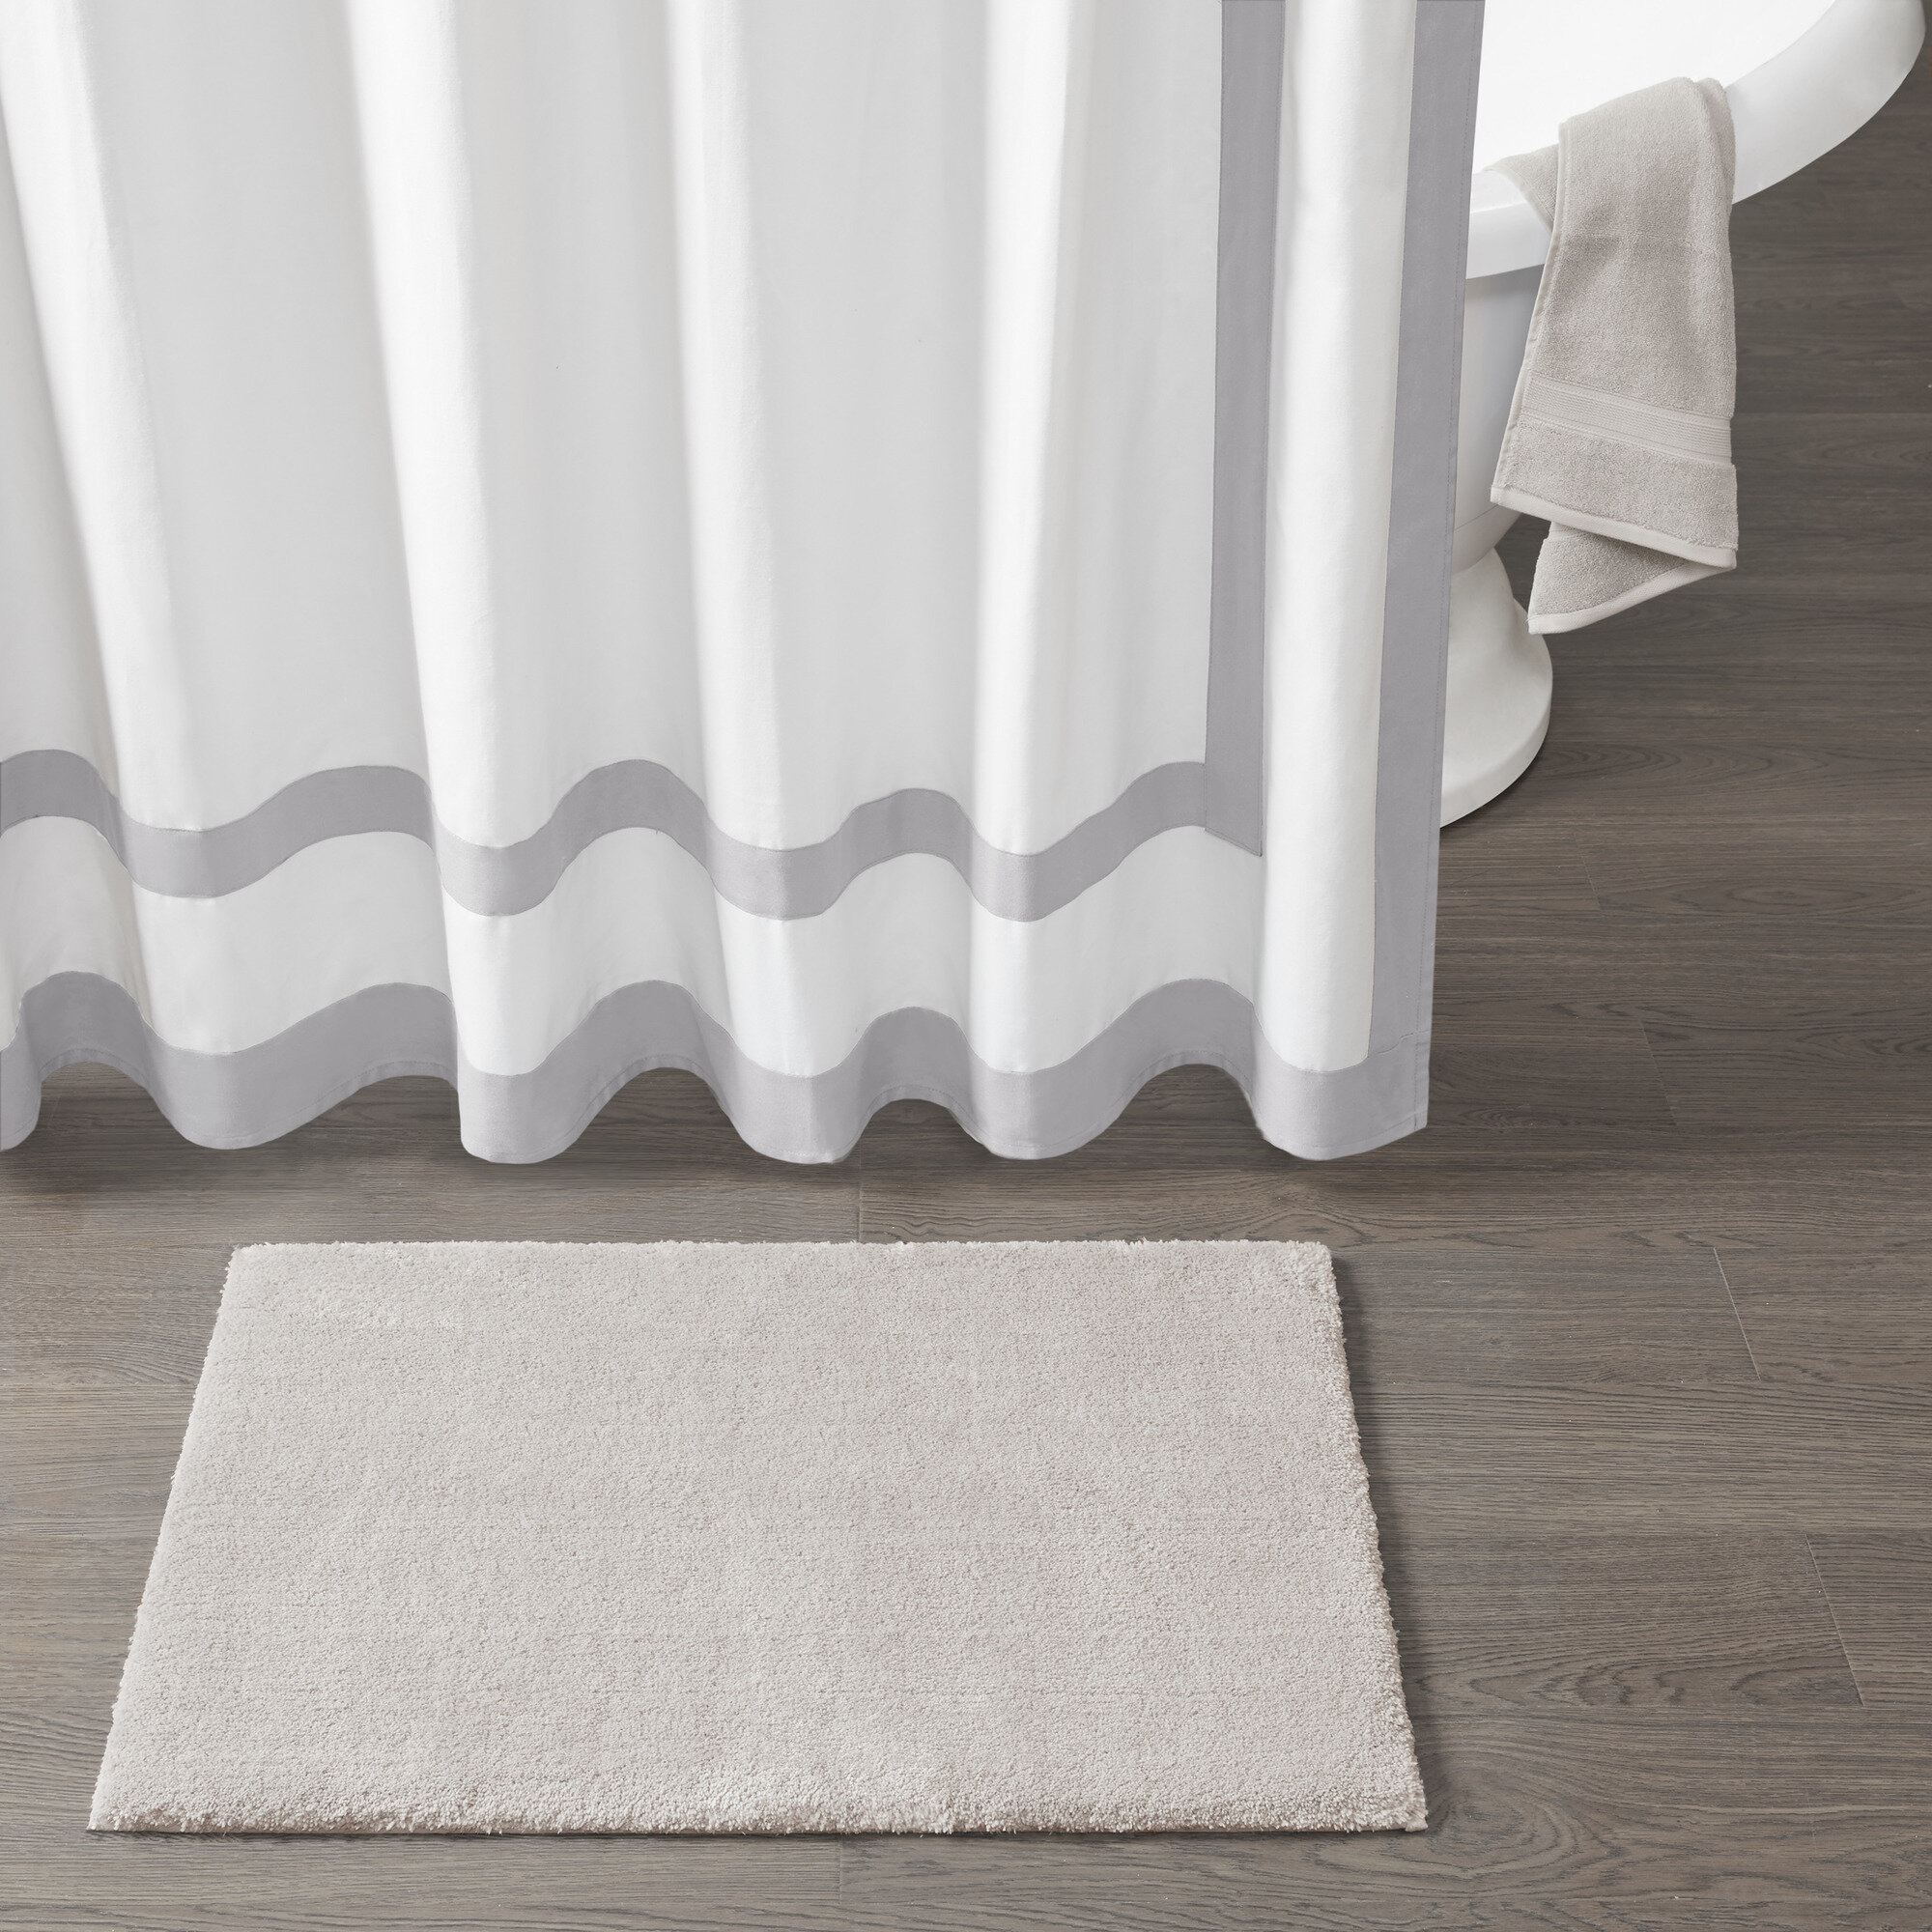 Buy Trident Bath Mat, 800 GSM, Soft and Extra Absorbent, 20 x 31